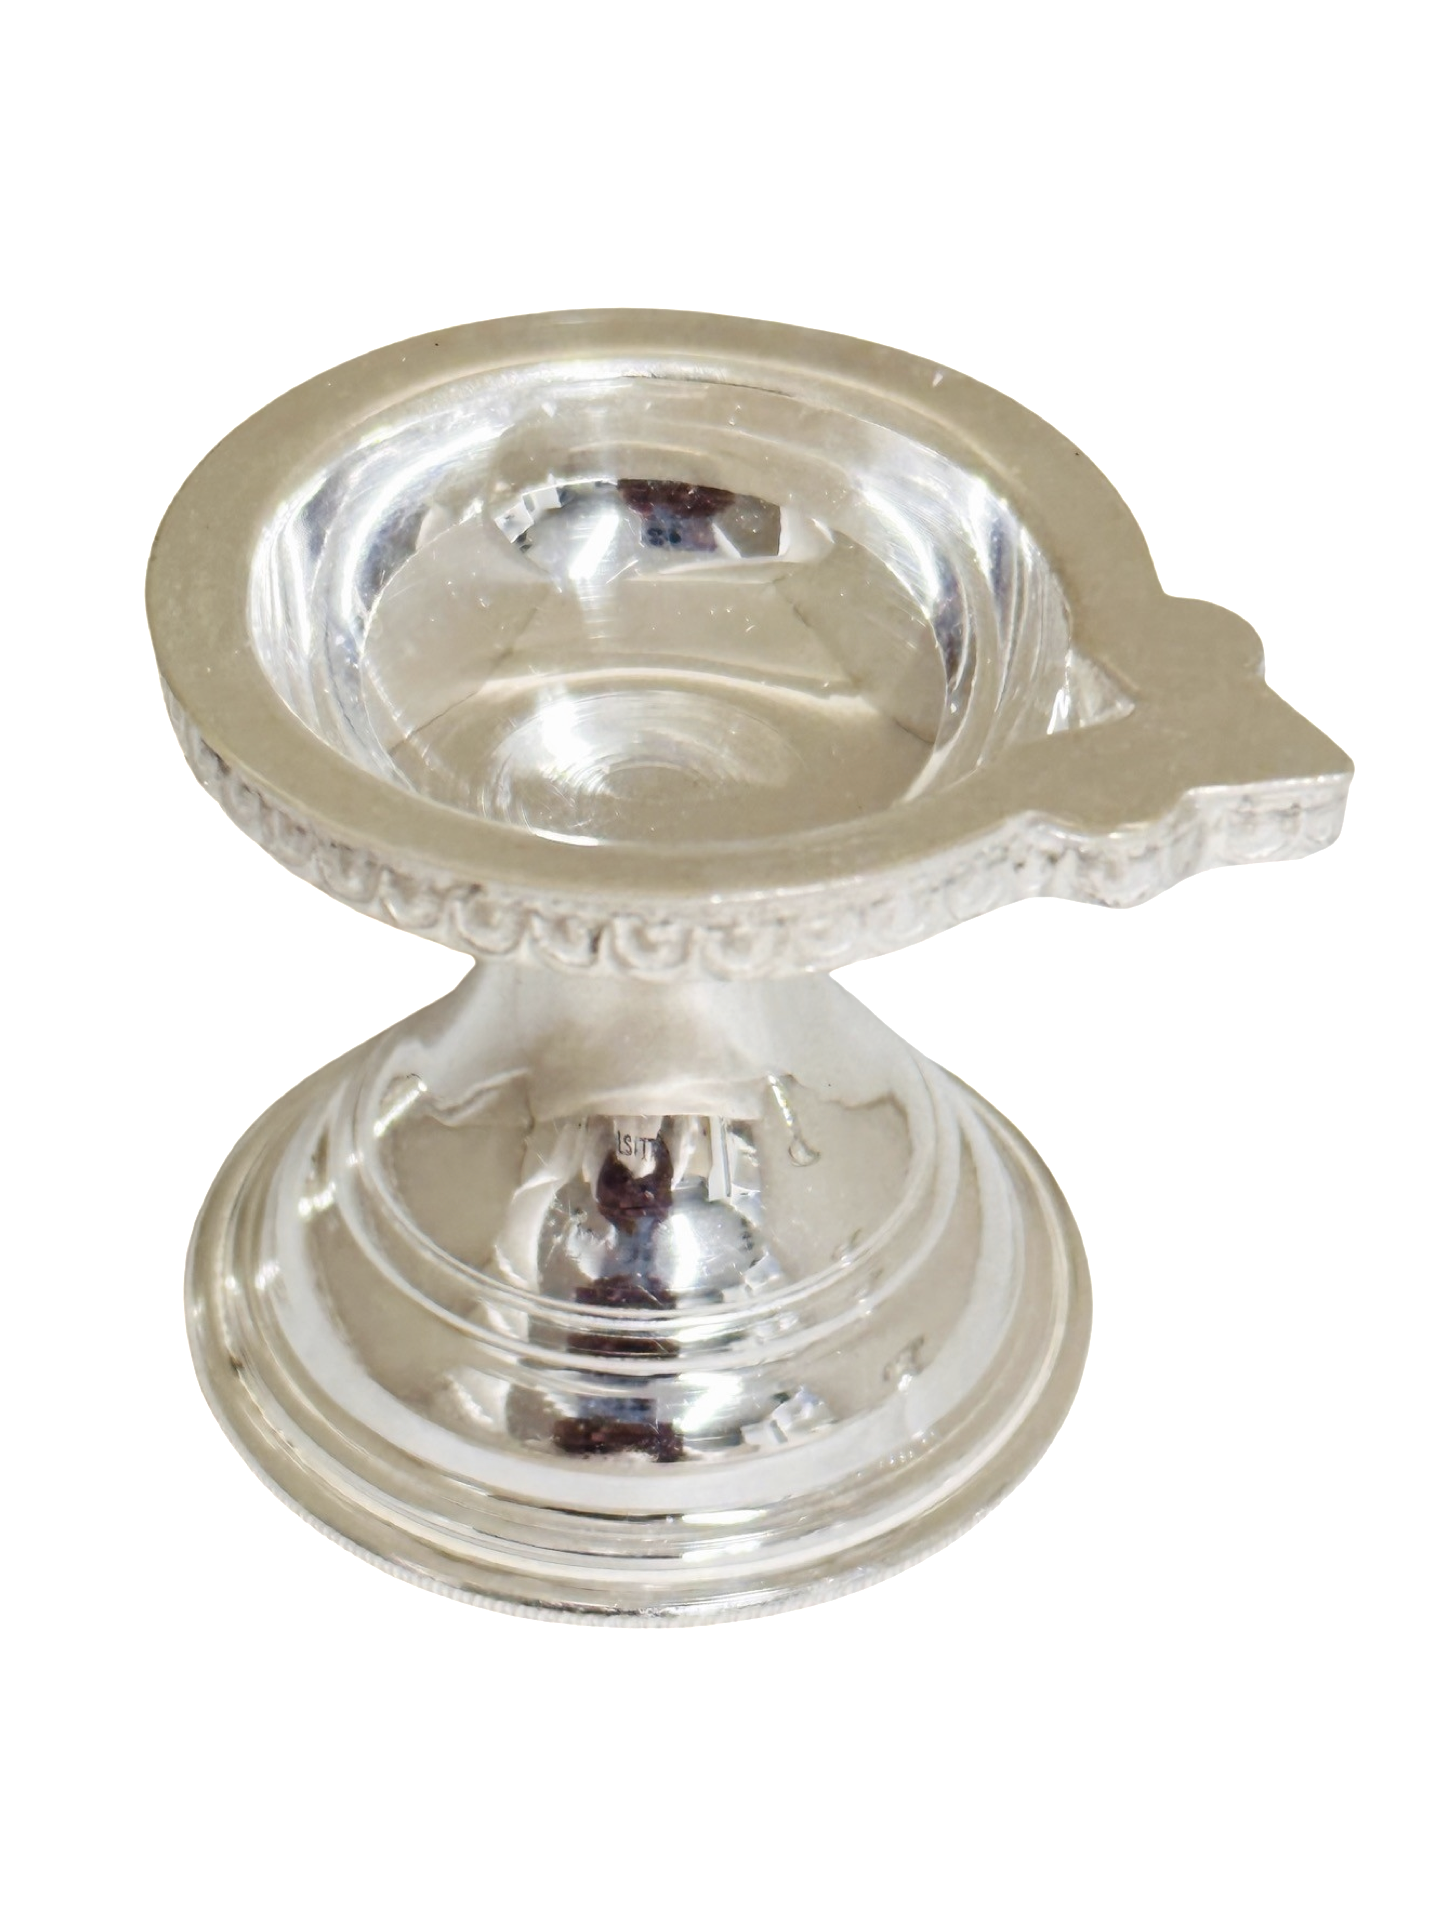 925 Silver Plain Deepam with Beak 1.75 inches